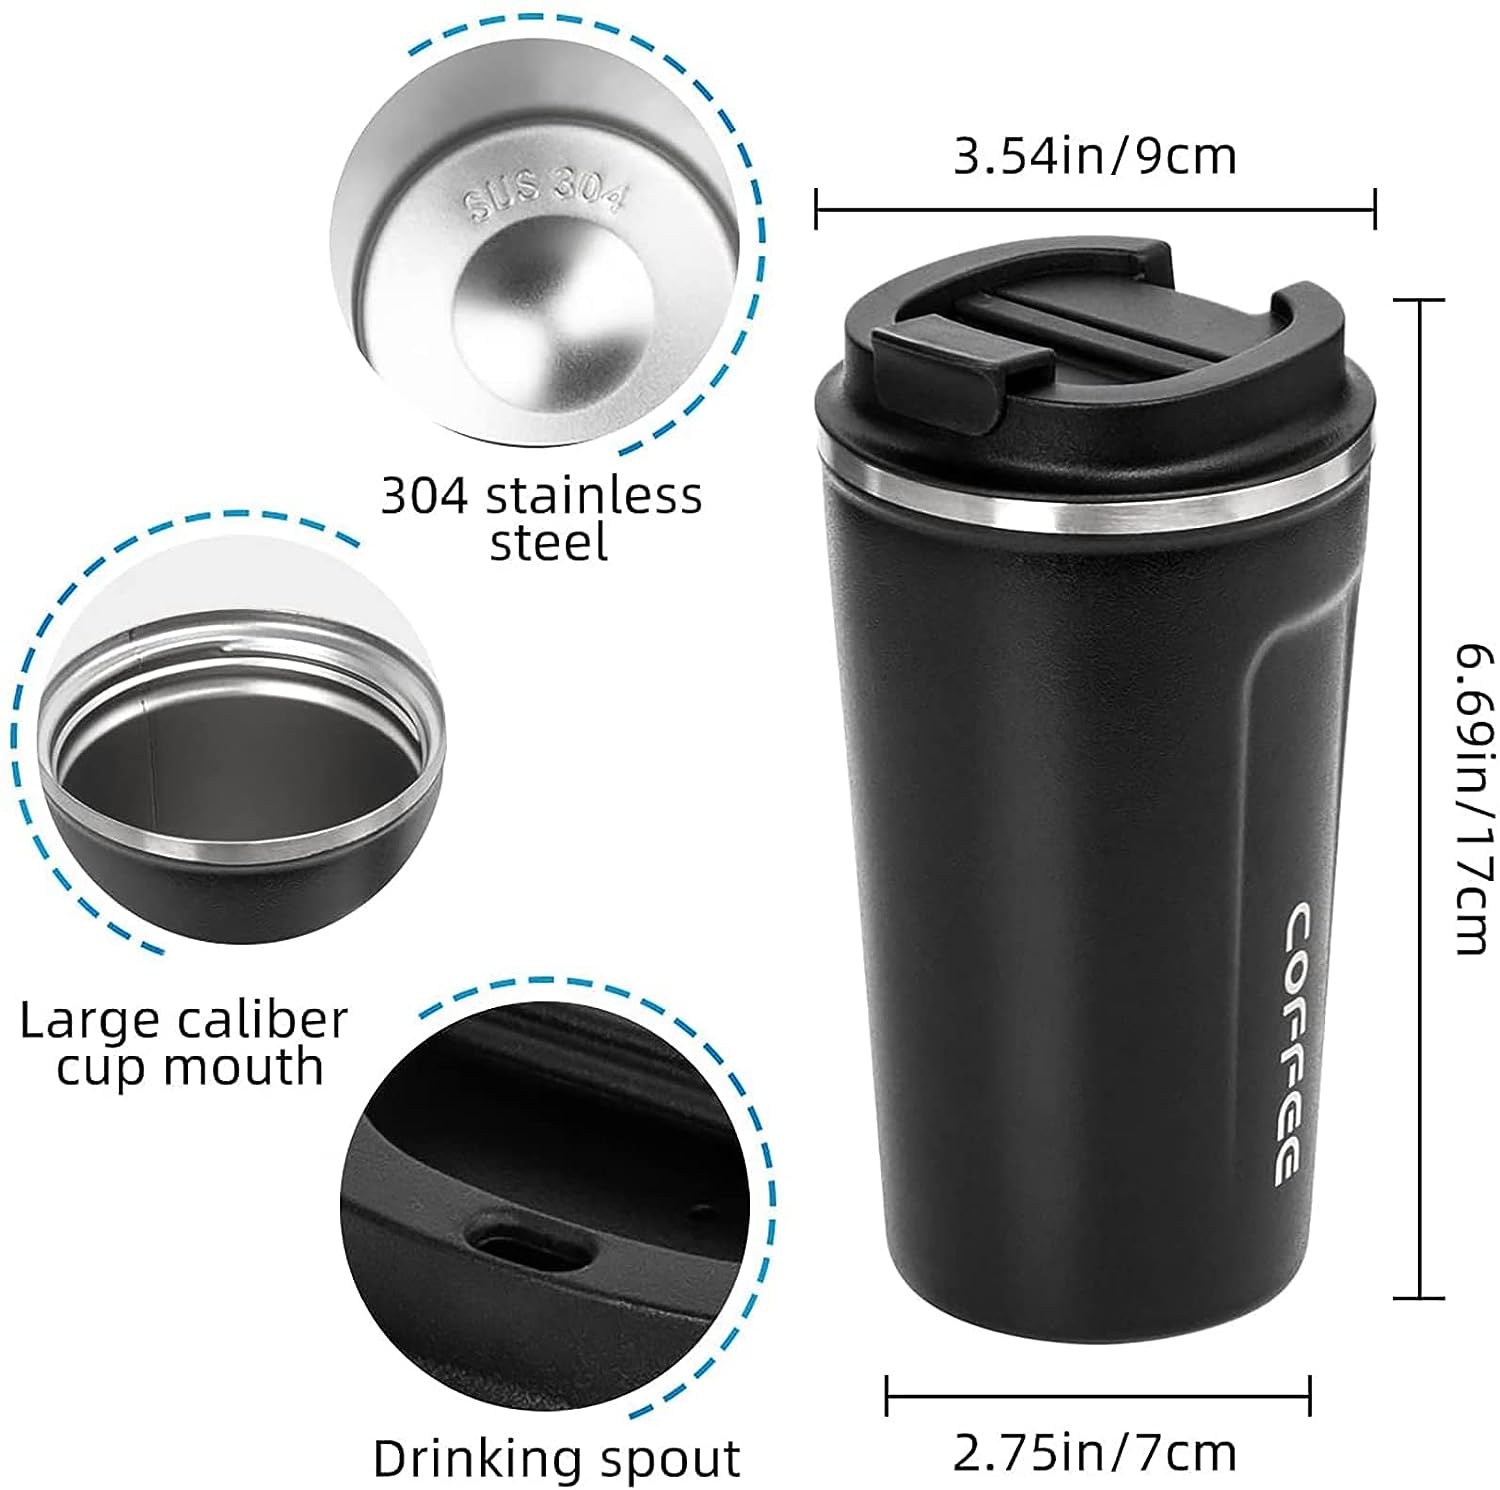 Travel Coffee Mug Double Walled Thermos Flask with Lid - Spill Proof Hot & Cold Drinks; Premium Vacuum Insulated Travel Mug with Lid - Stainless Steel Travel Mug- Matt Black - Abrazo